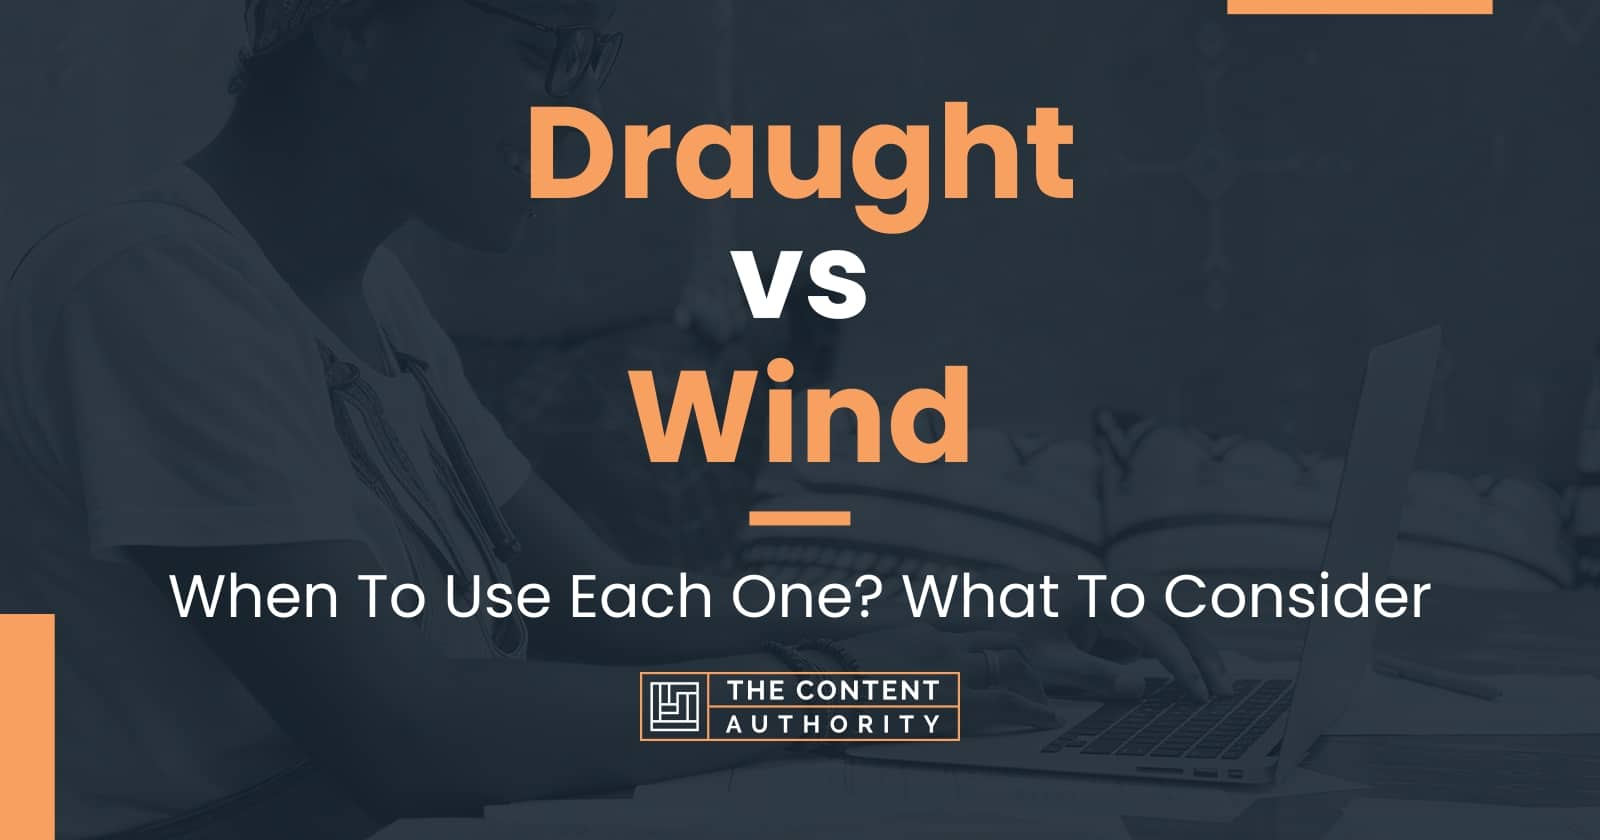 Draught vs Wind: When To Use Each One? What To Consider